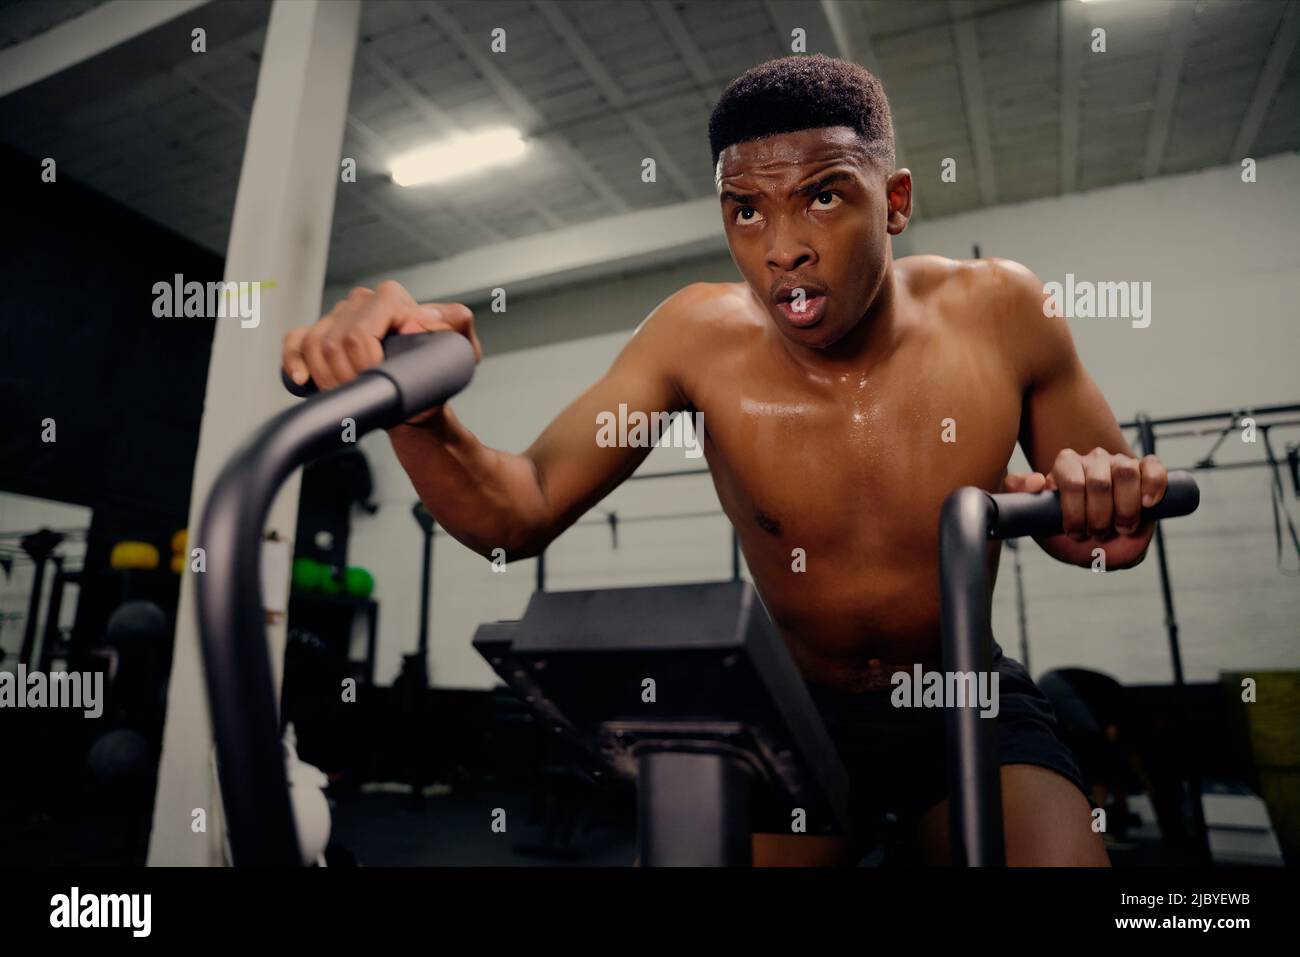 African American male using an elliptical trainer during cross fit training. Male athlete exercising intensely in the gym. High quality photo Stock Photo